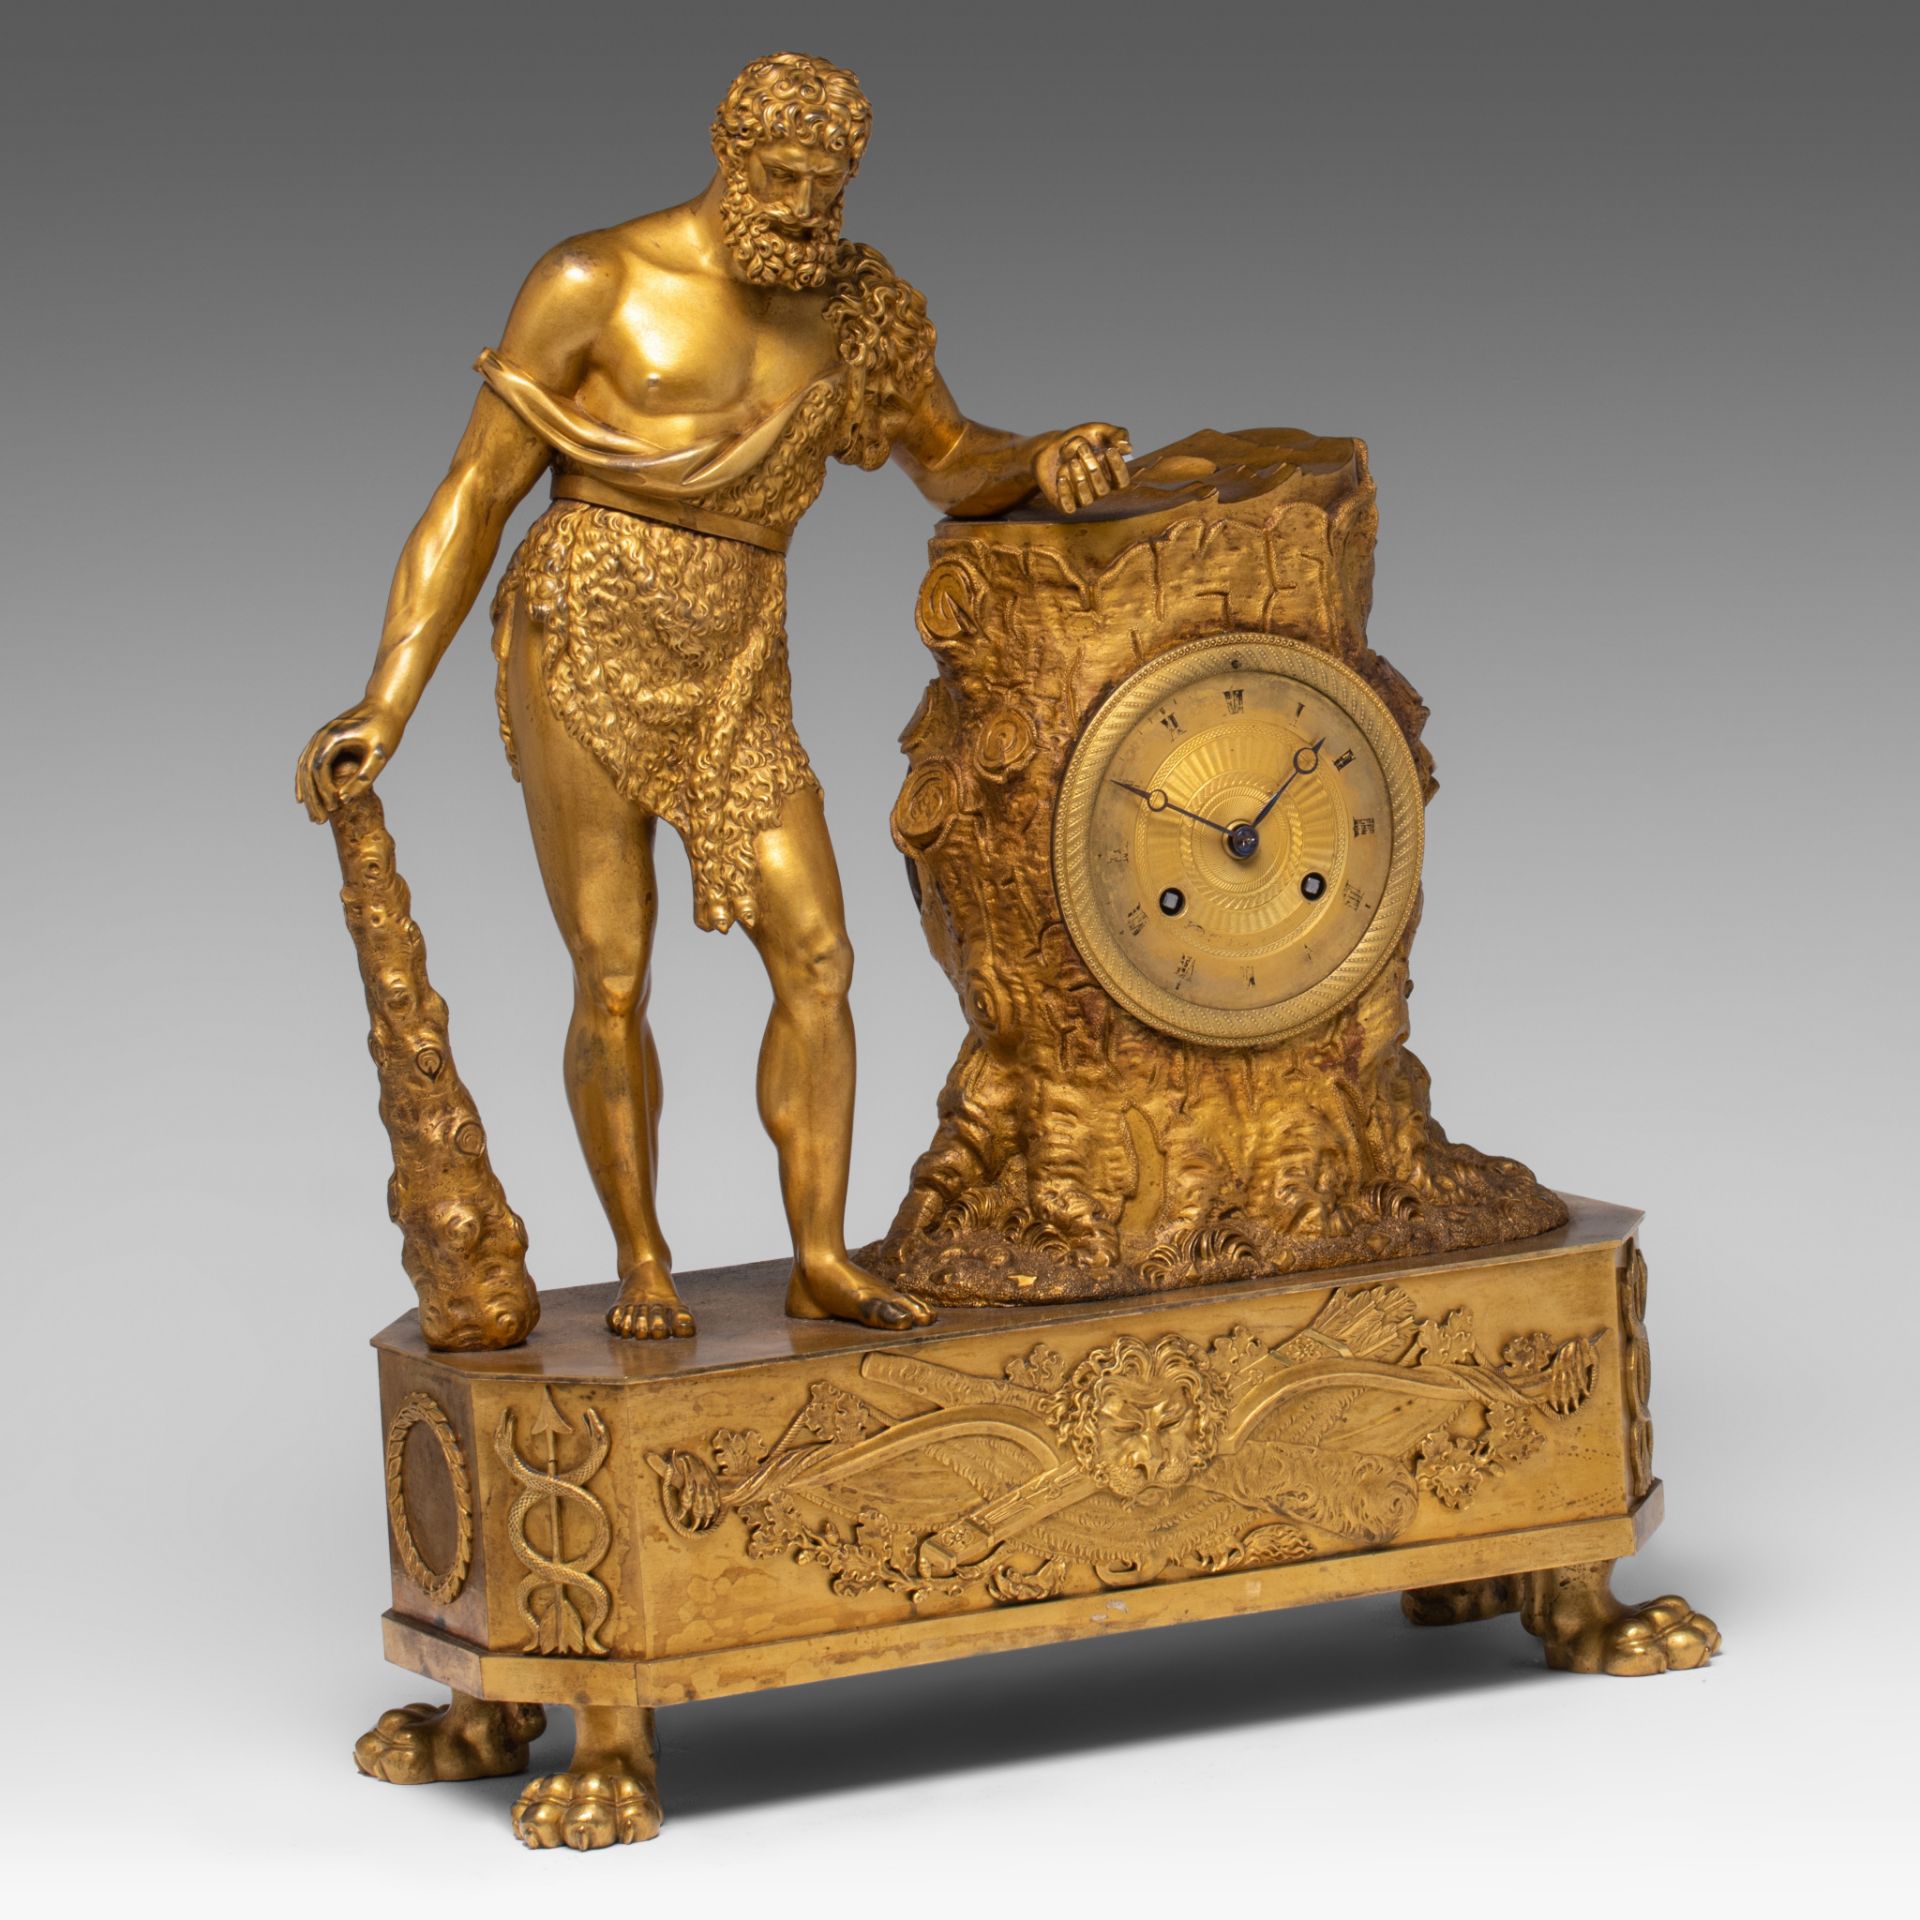 A French Empire gilt bronze mantle clock with Hercules, H 49 cm